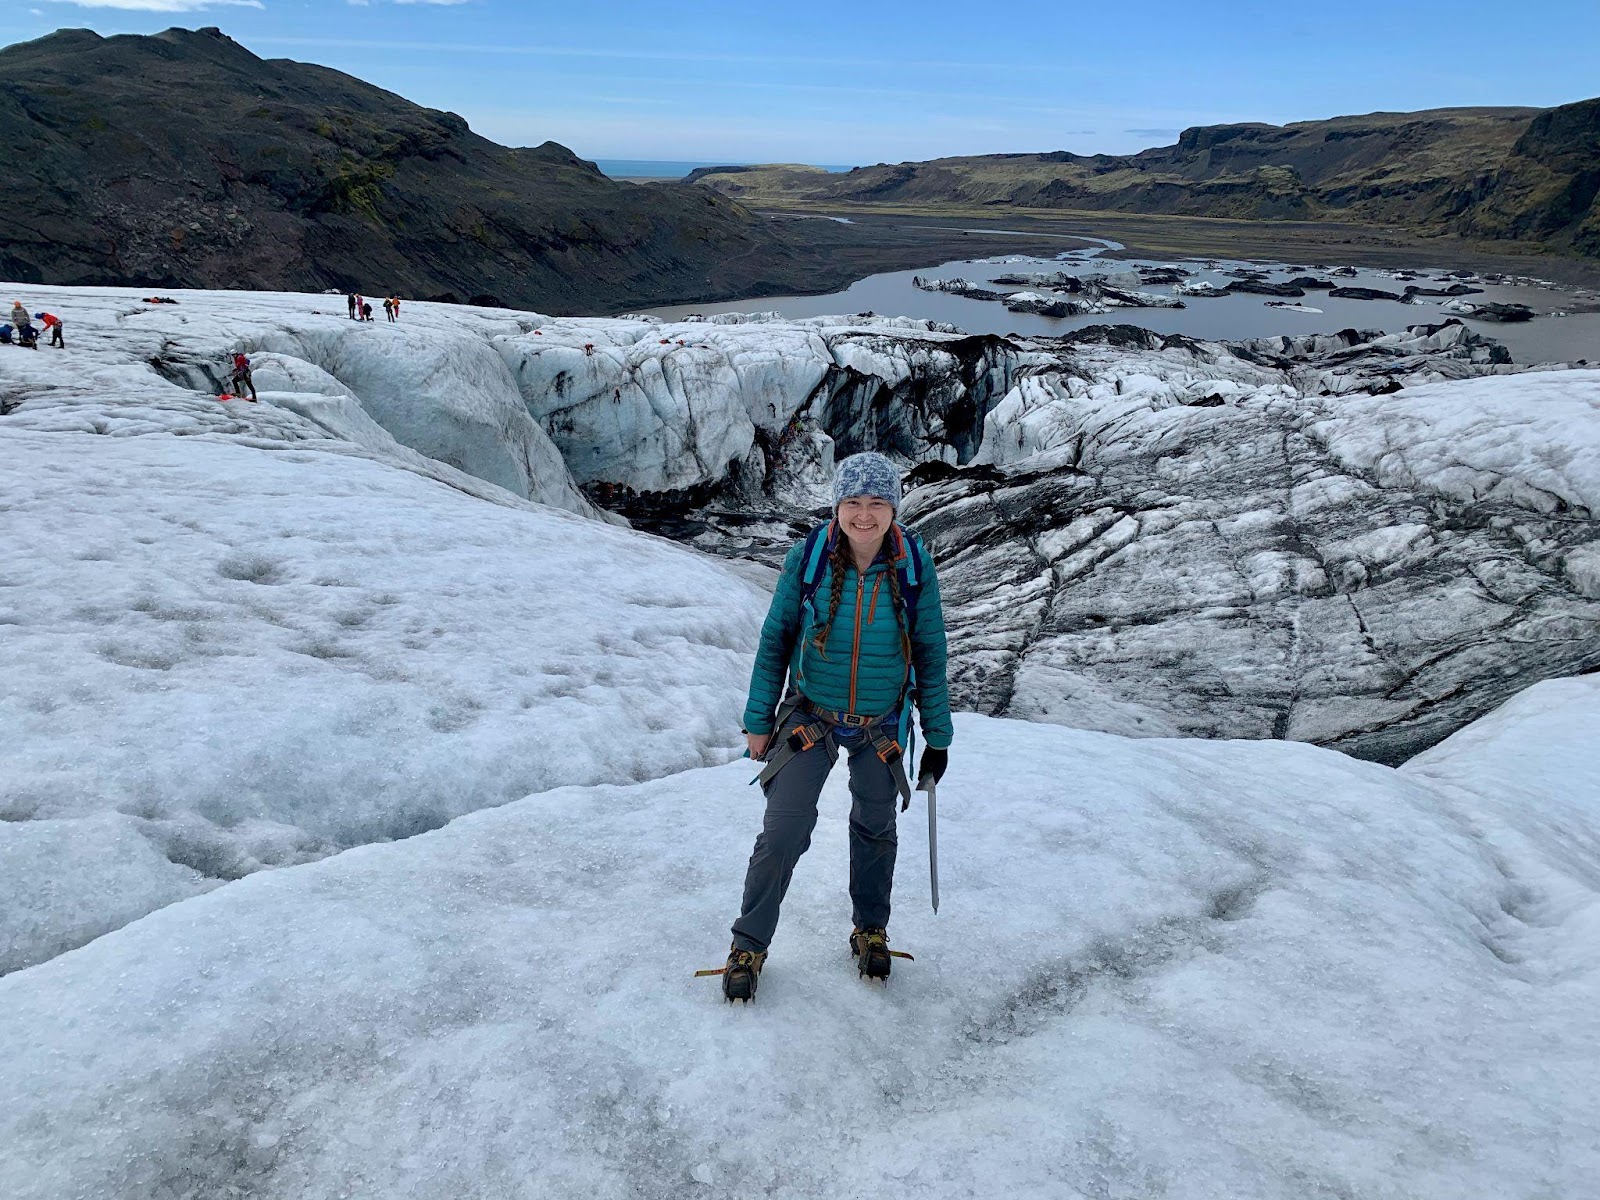 A woman stands on a glacier. Behind her, the ice gives way to a stream of water that weaves between two sets of hills into the distance.